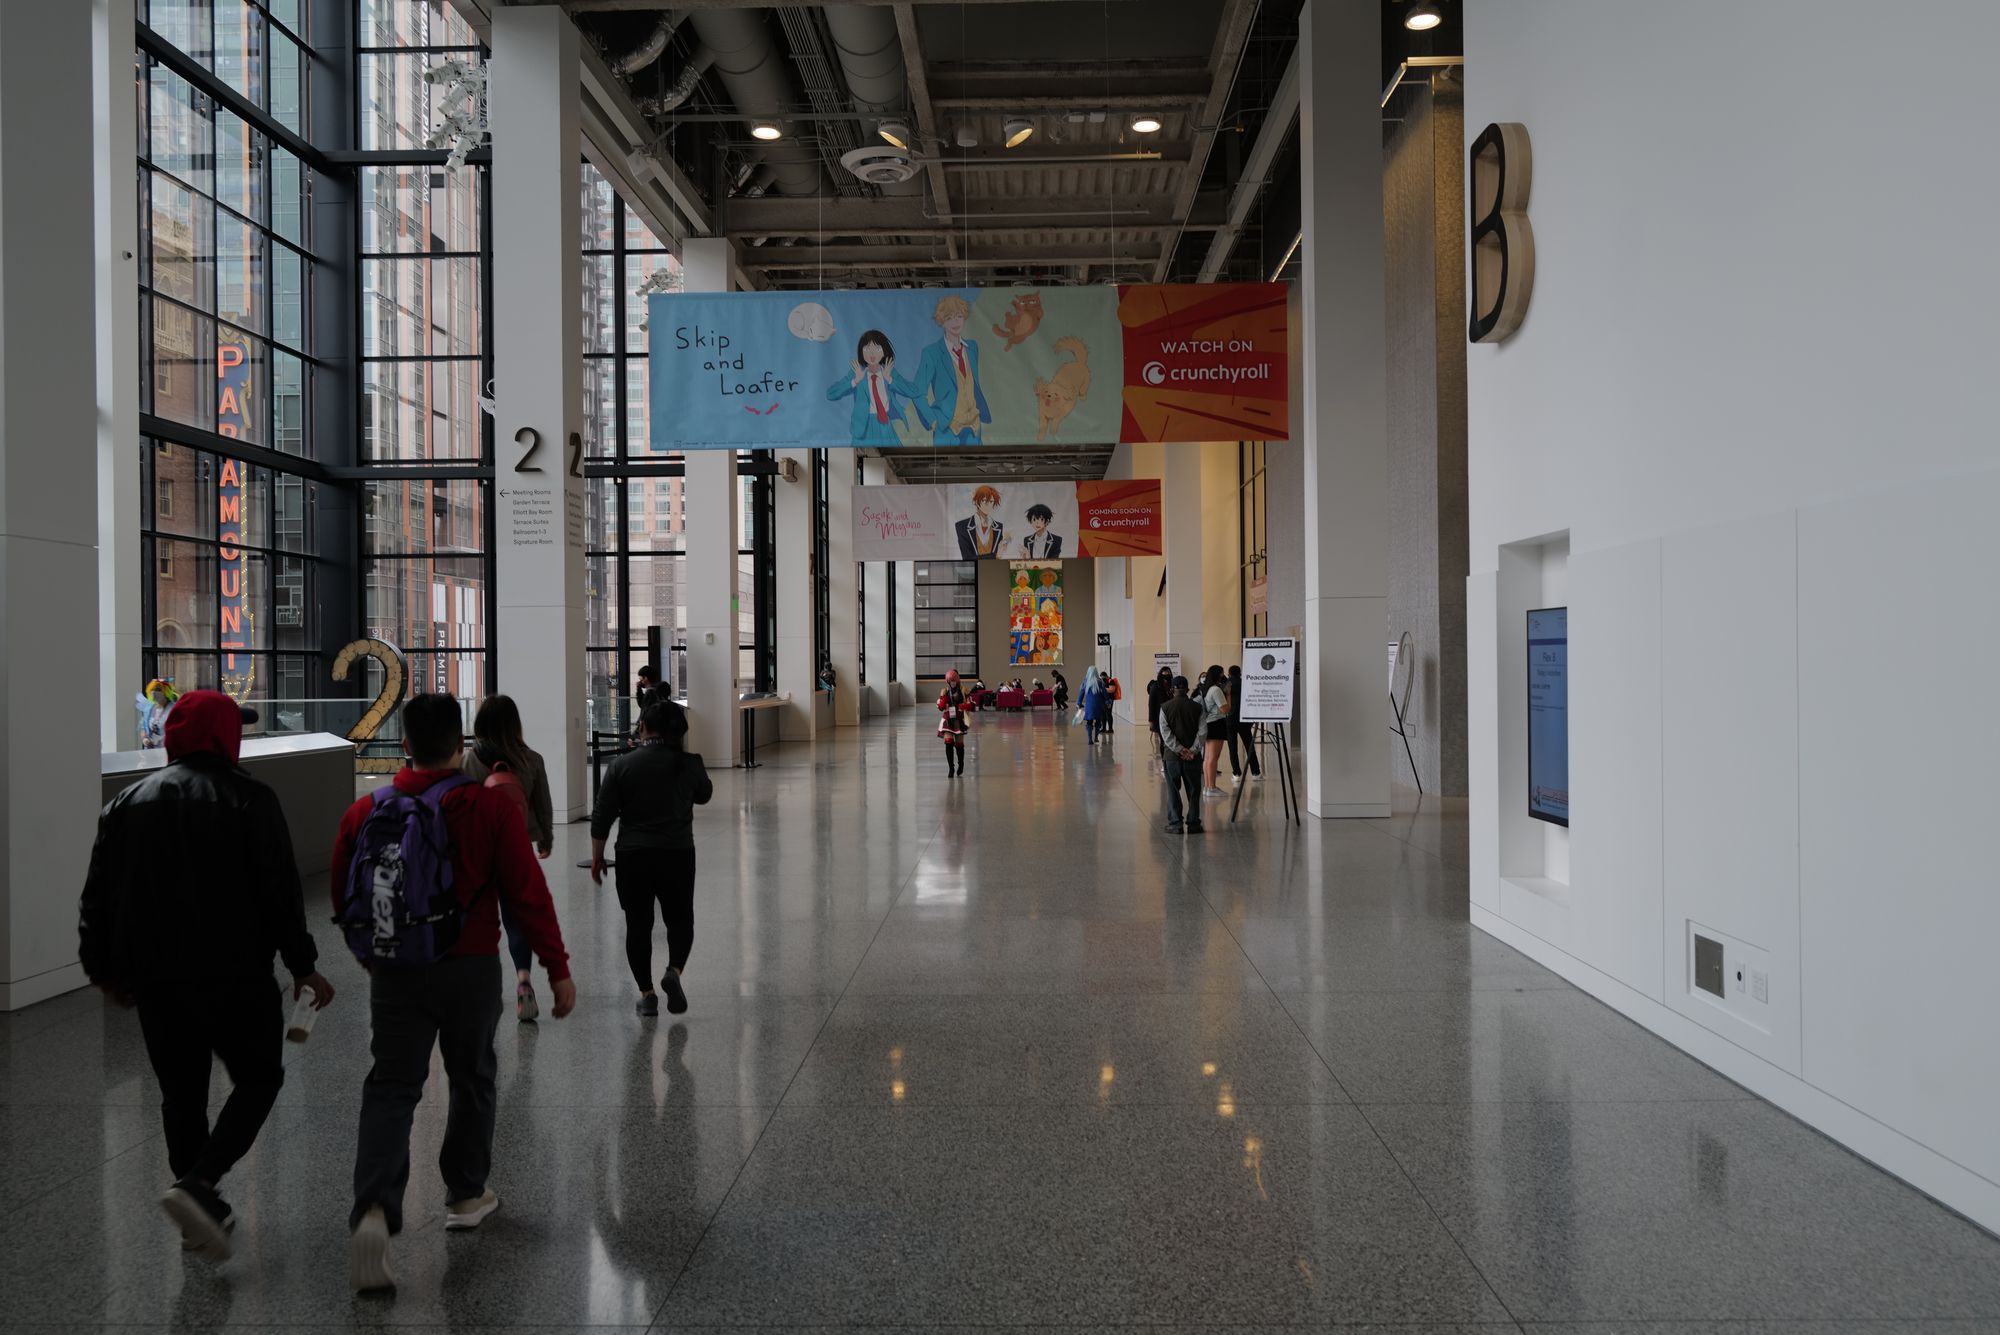 Quiet hallways in the Seattle Convention Center, with anime banners hanging overhead